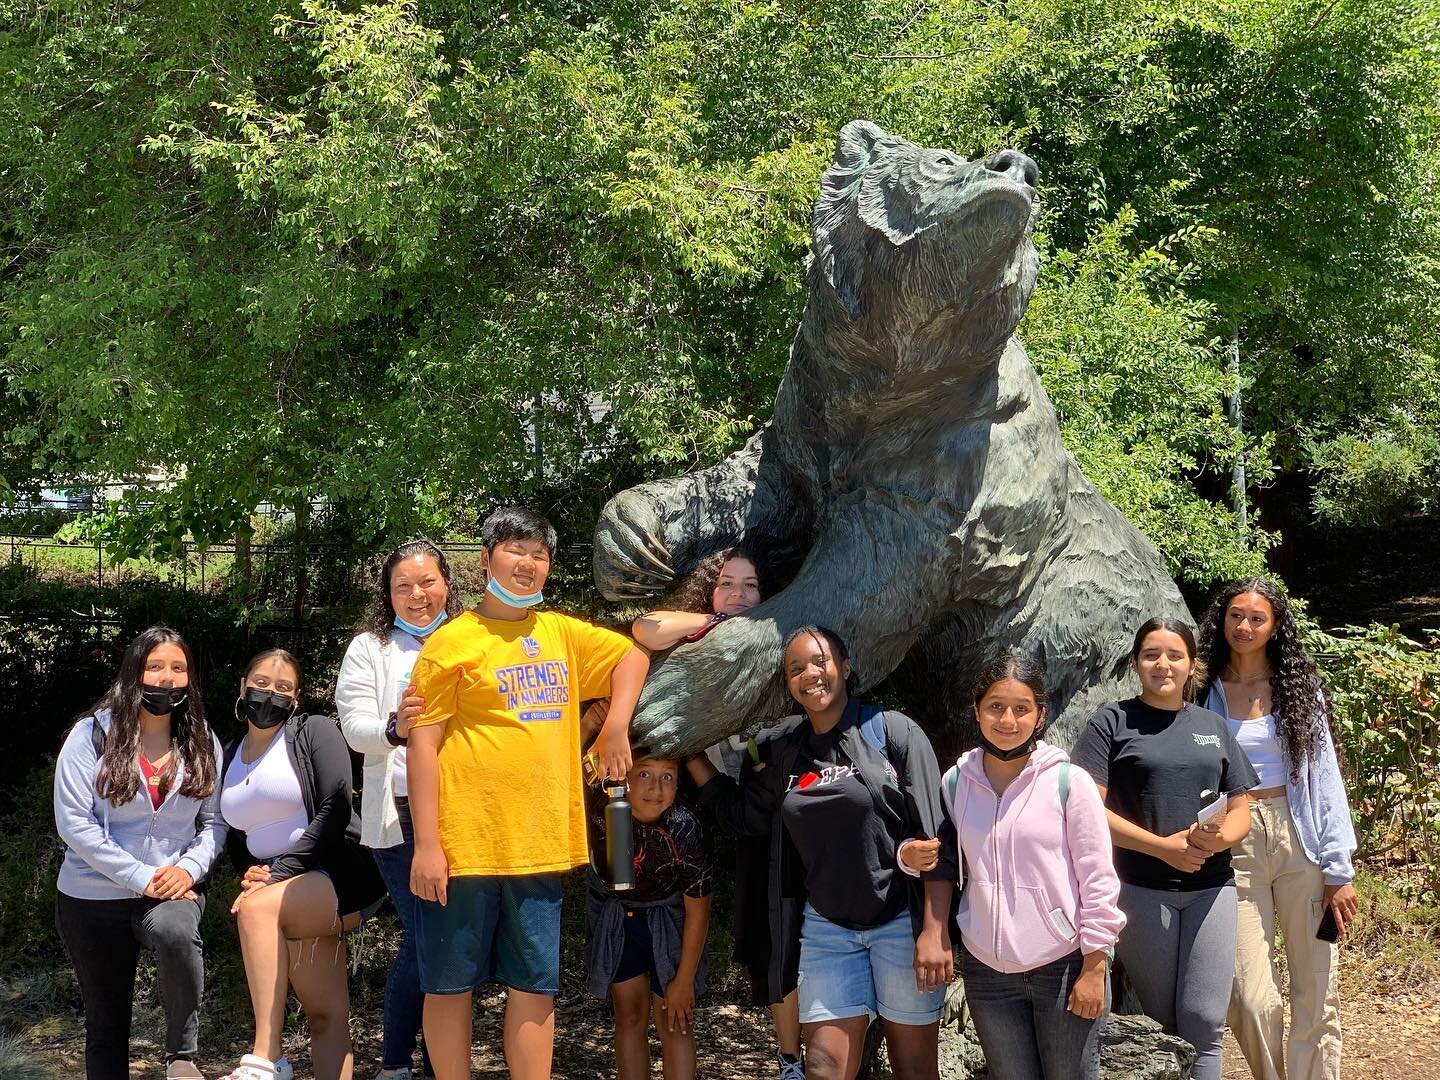 EPATT High Schoolers, middle schoolers, and parents visited @ucberkeley Big thanks to our tour guide Jimmy!! #gobears #4.0Hill